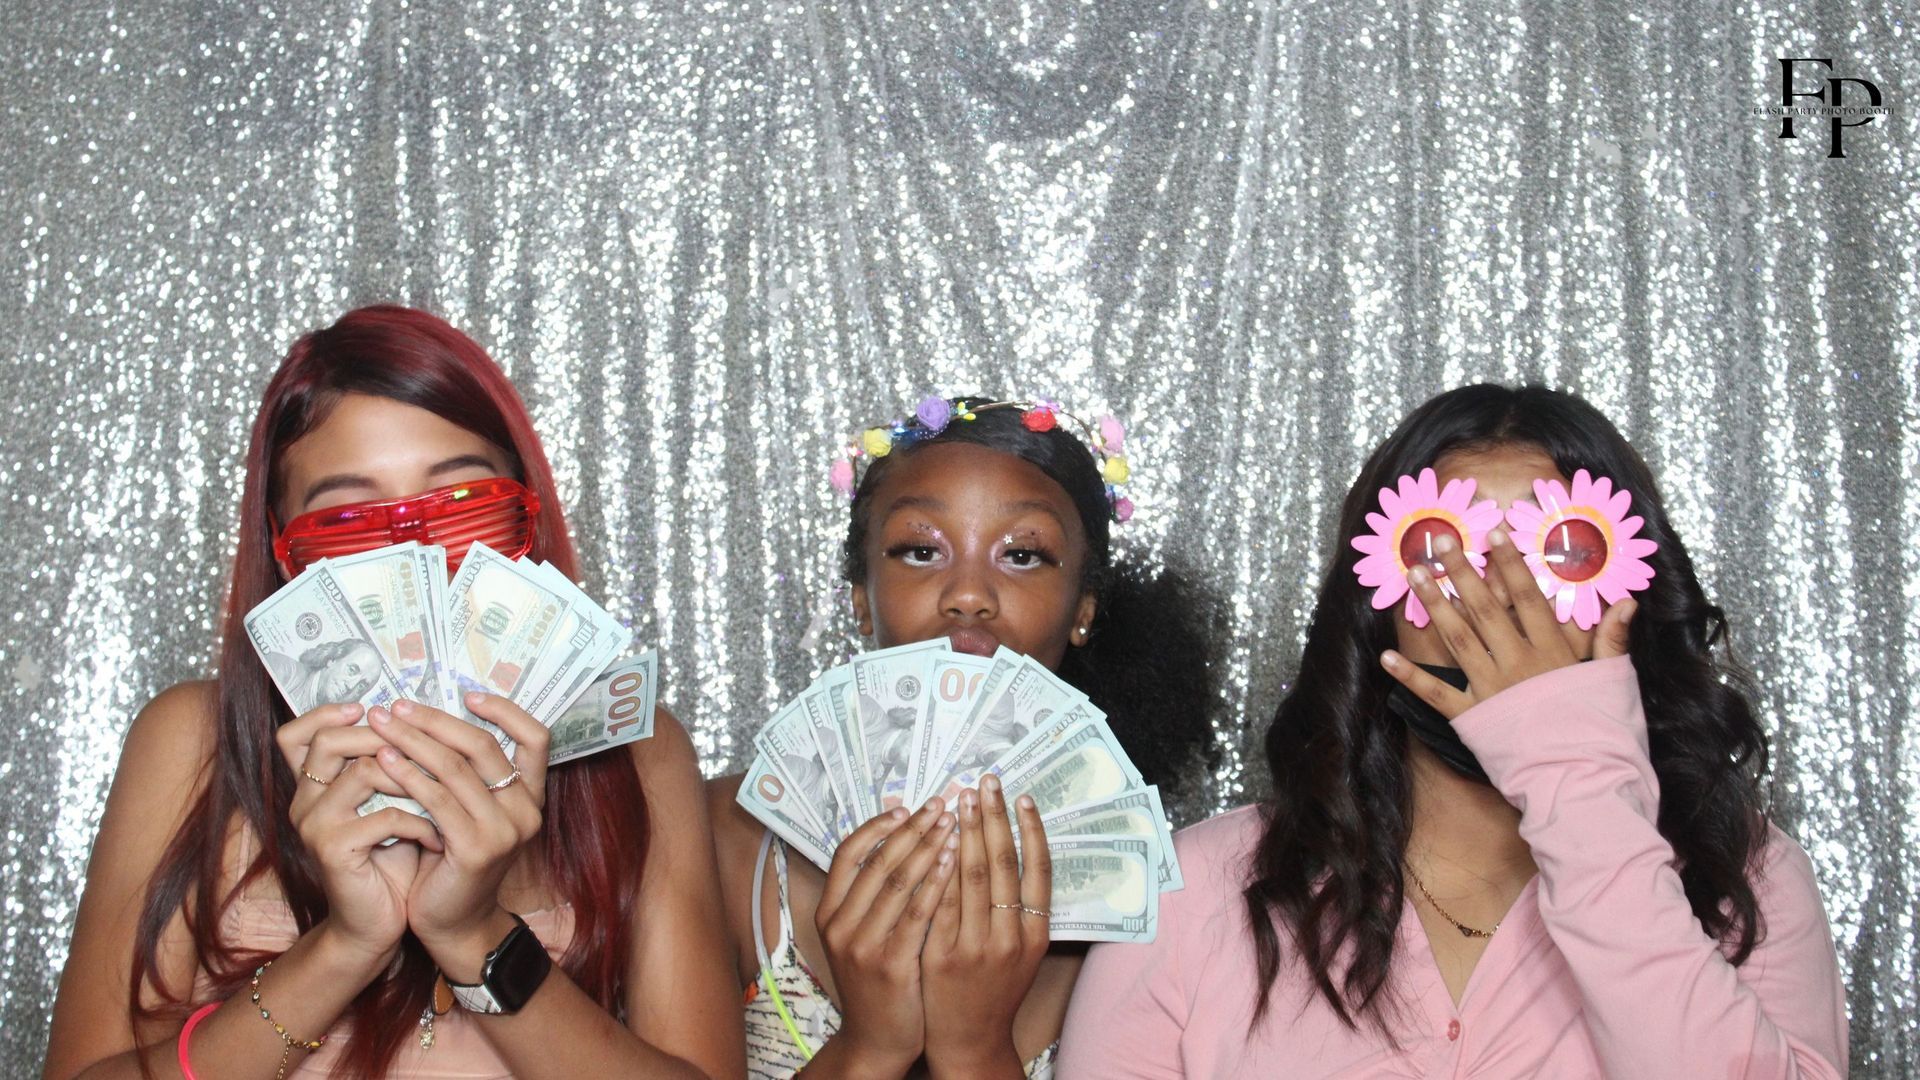 Three girls inside an Oval Mirror Photo Booth, holding money and posing for a fun picture.